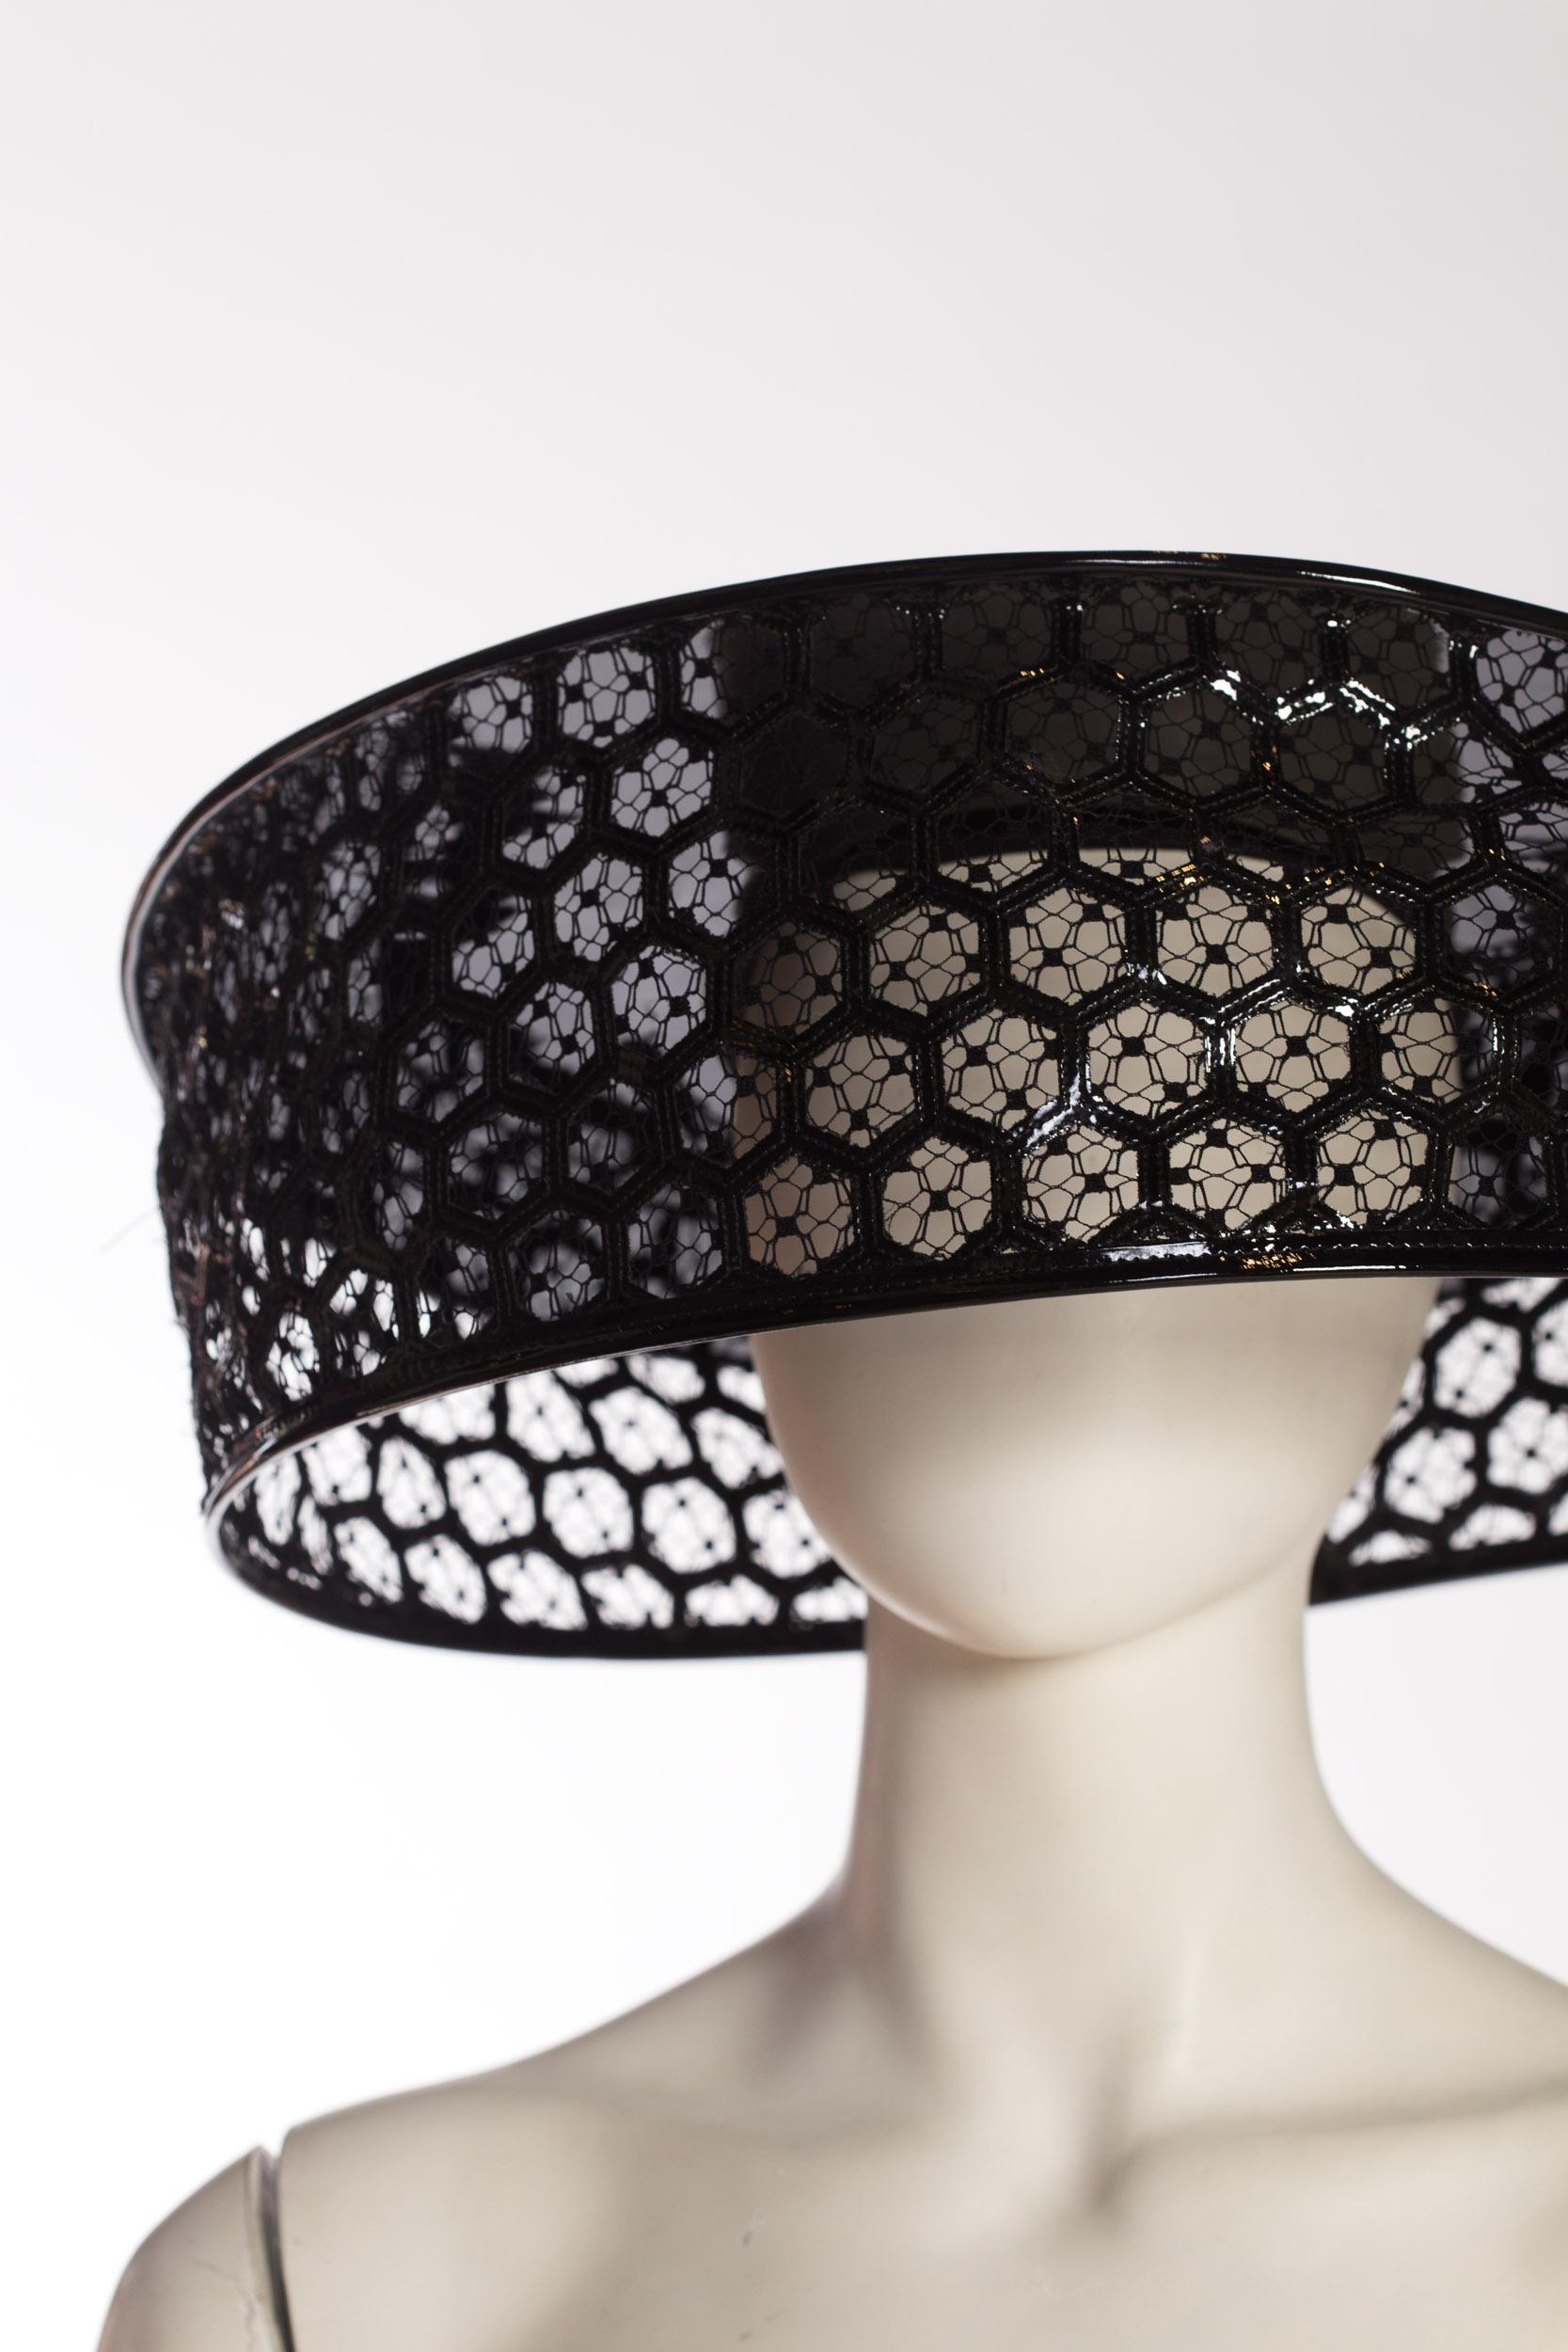 Women's 2013 Alexander McQueen Beekeeper Hat Black Patent Leather With 22 Circumference